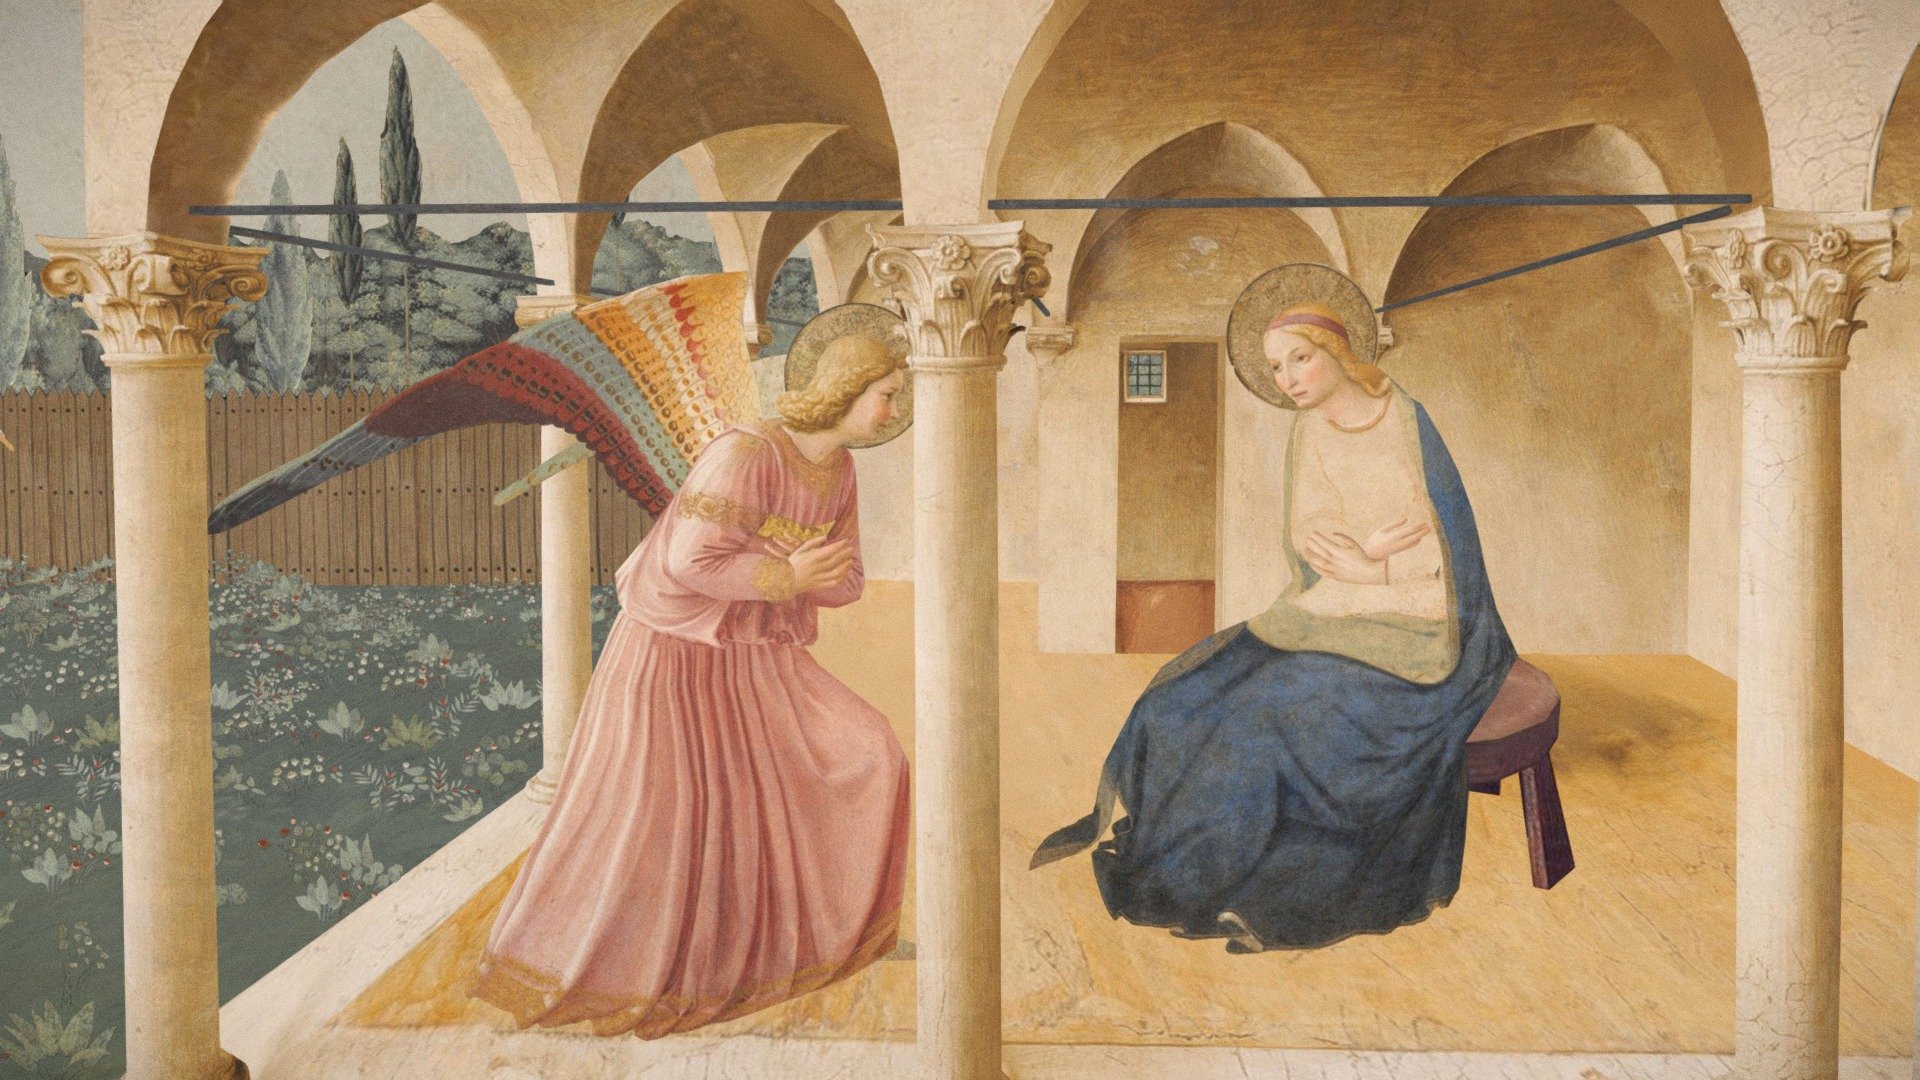 In the mid-fifteenth century Fra Beato Angelico frescoed the Dominican Convent of San Marco where he used to live. The fresco of the Annunciation in the north corridor is set in a portico overlooking the garden of the Virgin. A very similar garden figures in another fresco of the convent depicting the apparition of Christ to Mary Magdalene who mistakes him for the gardener. A reference that underlies a long medieval tradition that linked the figure of Christ to the flower. 

Two years ago, after reading these thoughts on a book by Didi-Huberman we came up with the idea of creating our first 3D painting: one of our favourite media to tell the infinite stories hidden in art.

Fra Angelico, Annunciation
fresco, Convent of San Marco, Florence, Italy
1440-1445 - The Annunciation - Fra Angelico - 3D model by Hermathena3D 3d model